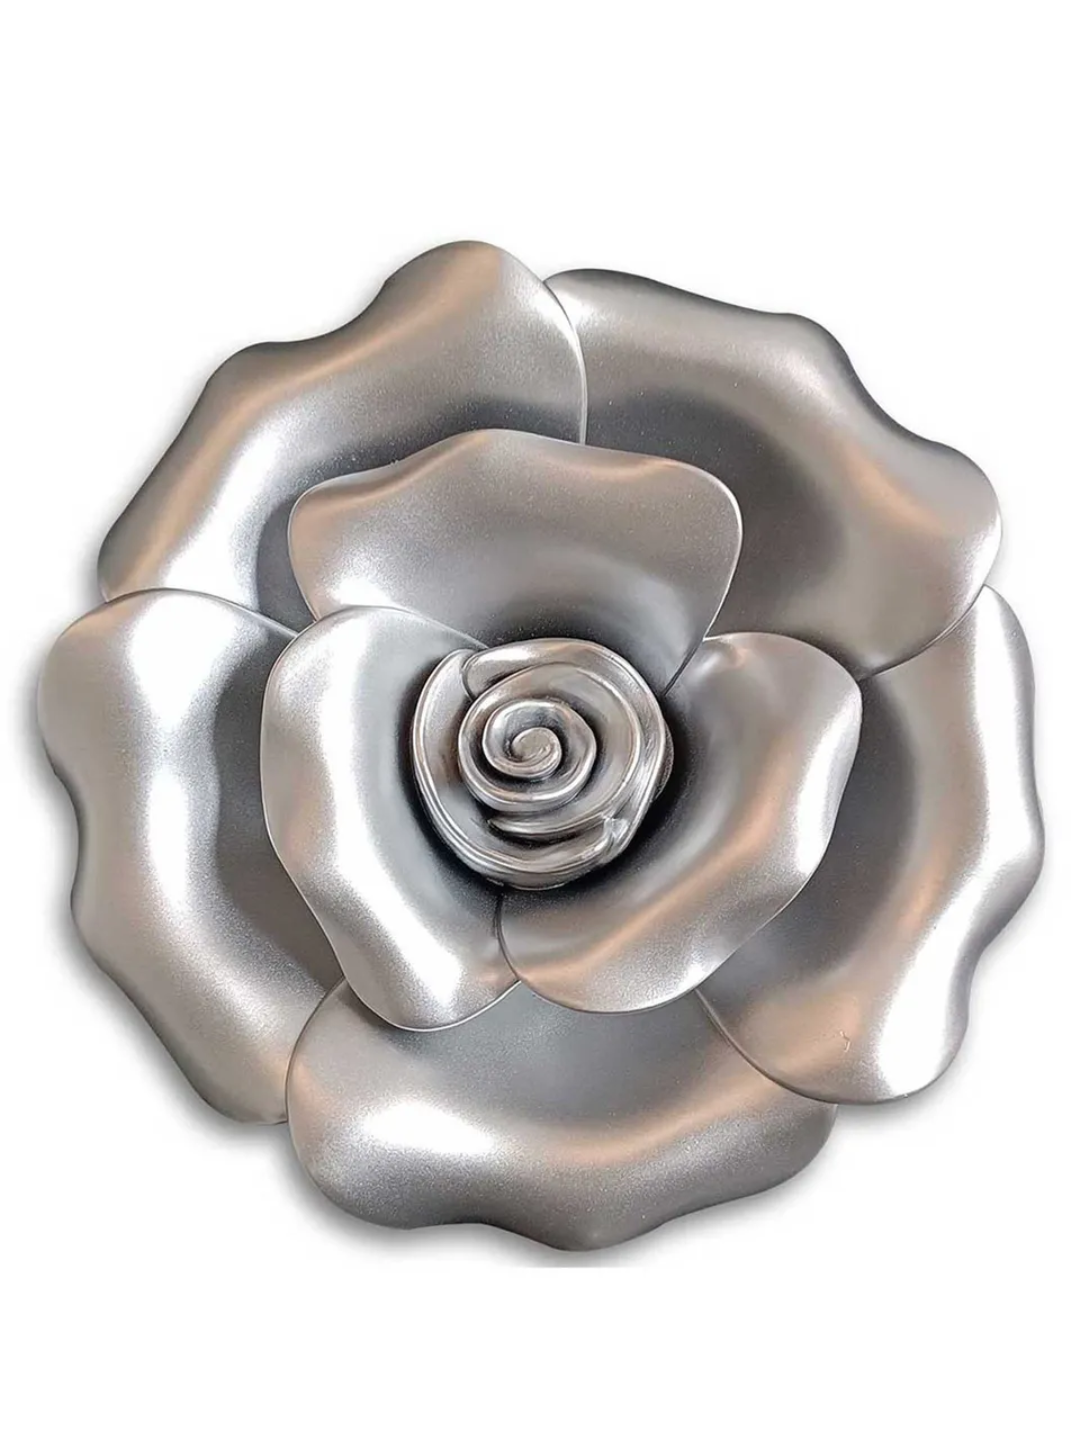 petals spiral silver rose Decorative Plastic Plate Décor, Hanging Carved Decal Set of 3